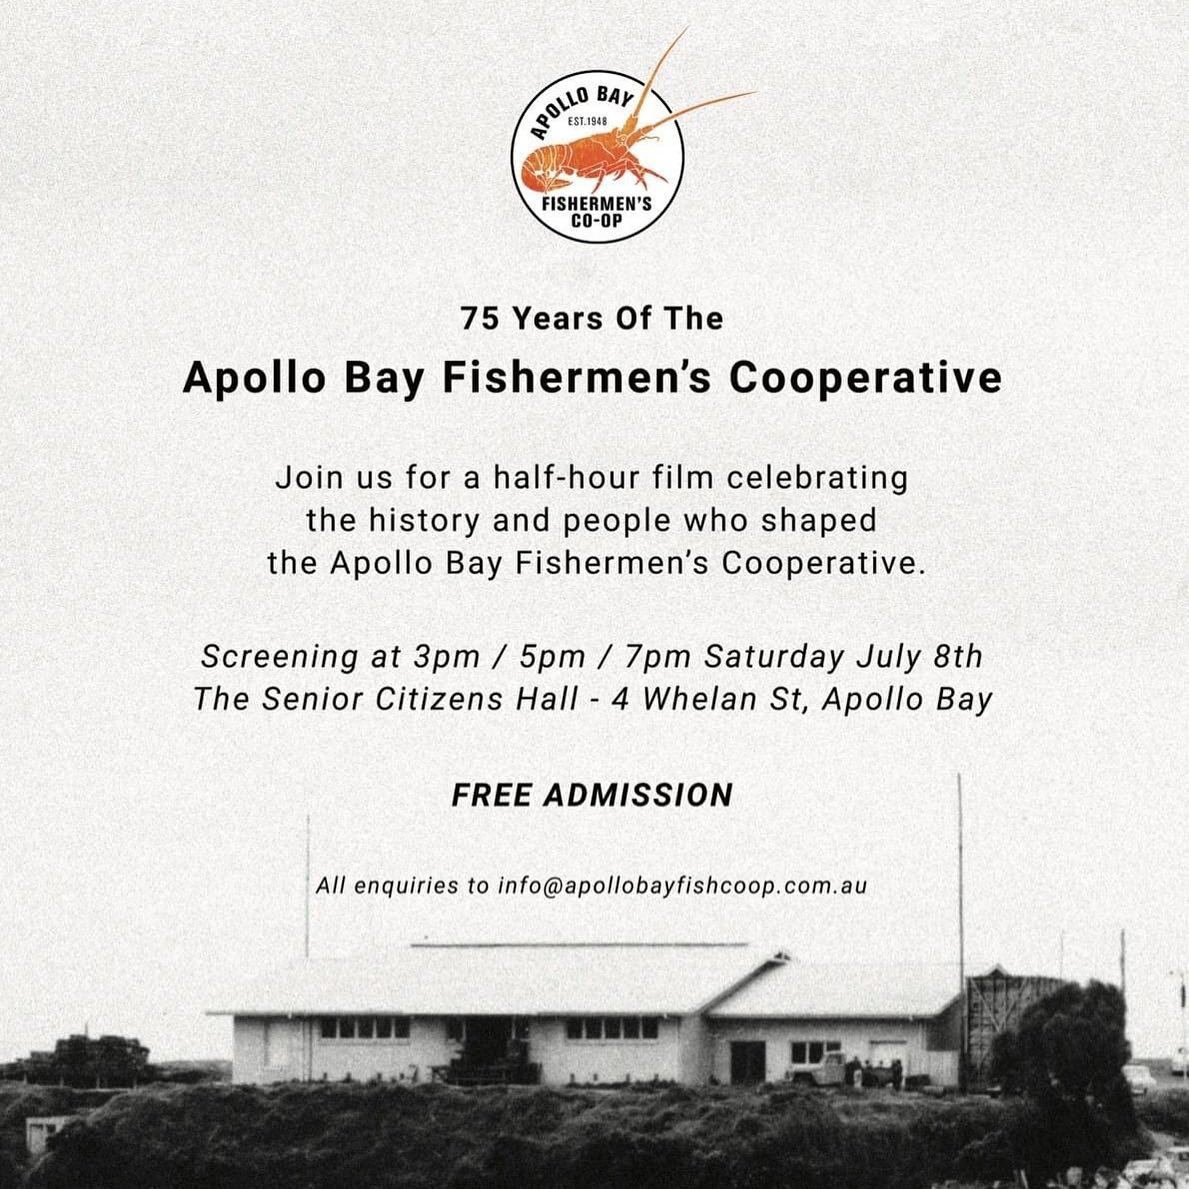 Today is the day! Get out of this wild weather and come and check out our film screening celebrating 75 years of The Apollo Bay Fisherman's Coop. 3pm-5pm-7pm at Apollo Bay Community Hall (formerly the senior citizens center) Hope to see you there.

P